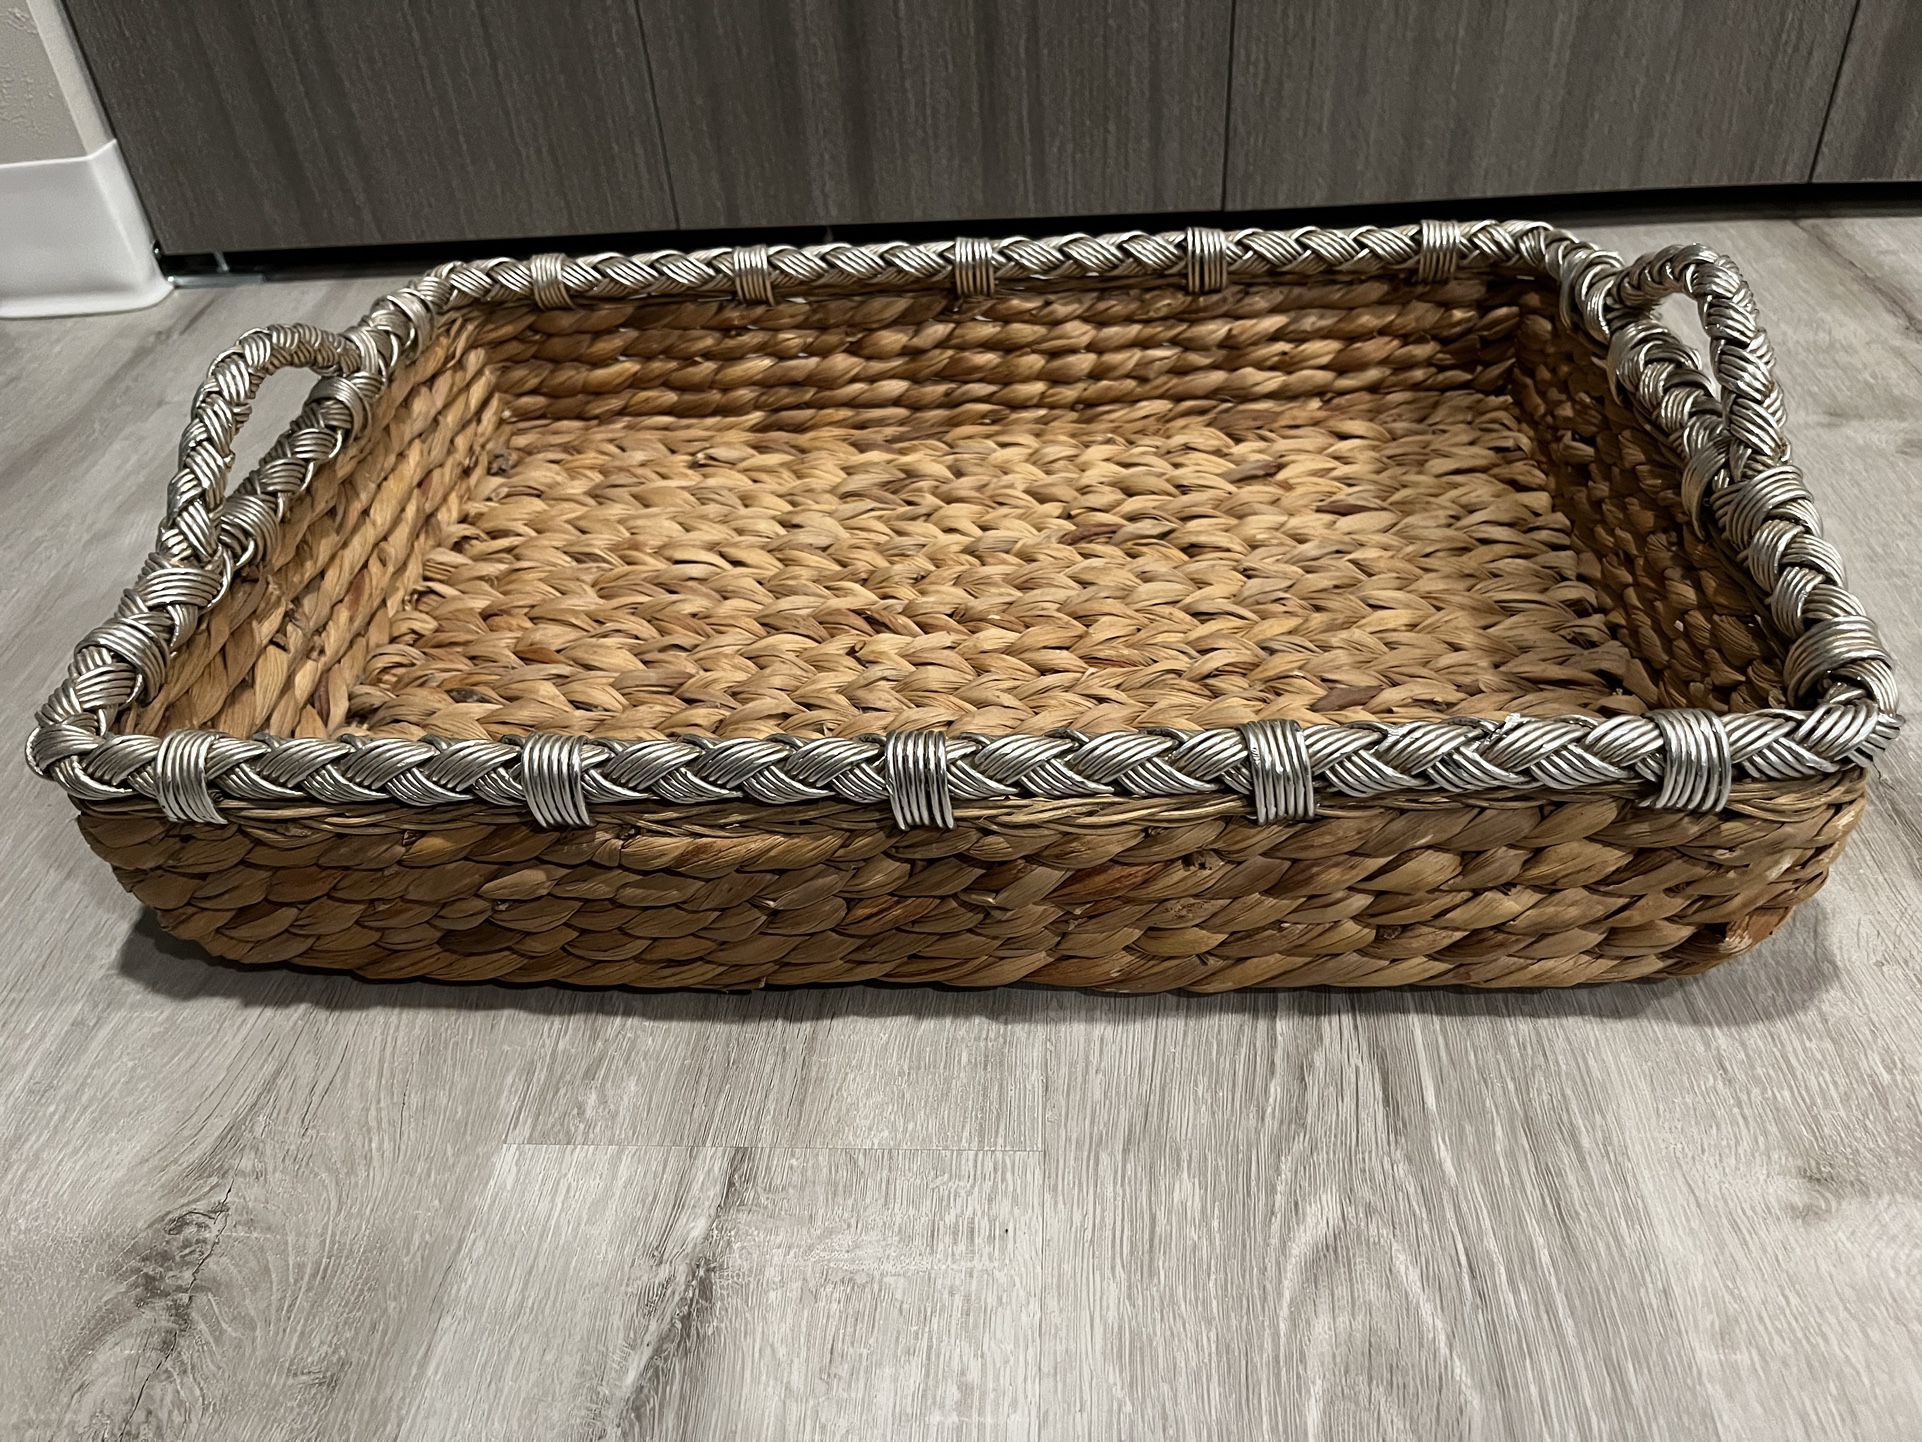 Woven Rectangular Tray With Handles